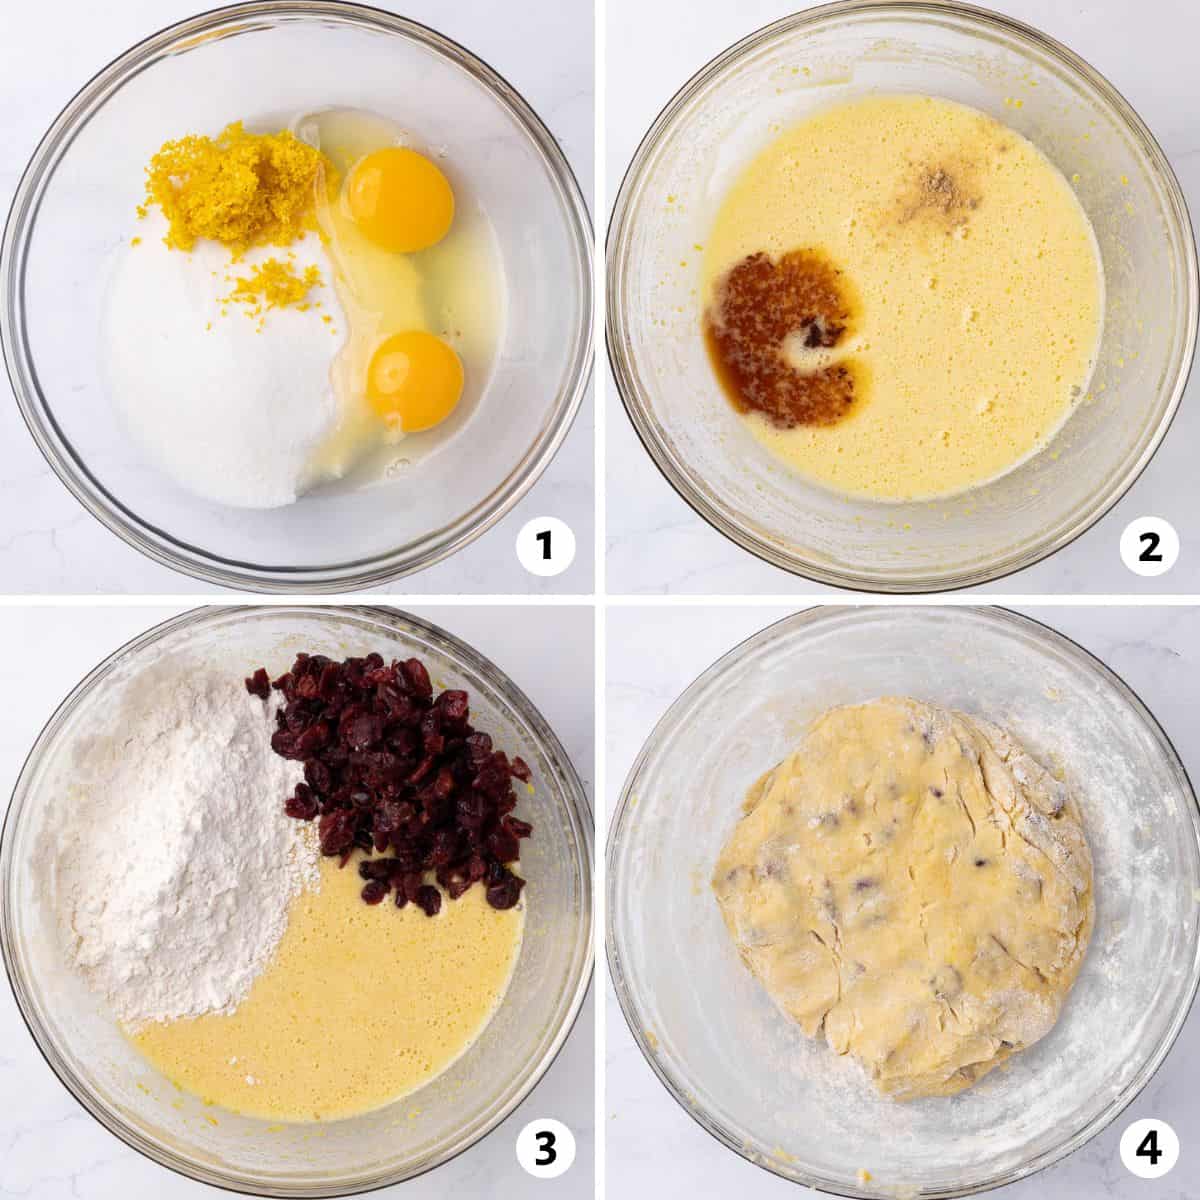 4 image collage preparing dough in a bowl: 1- eggs, zest, and sugar in a bowl, 2- after mixing with vanilla added, 3- flour and cranberries added, and 4- dough after combined.